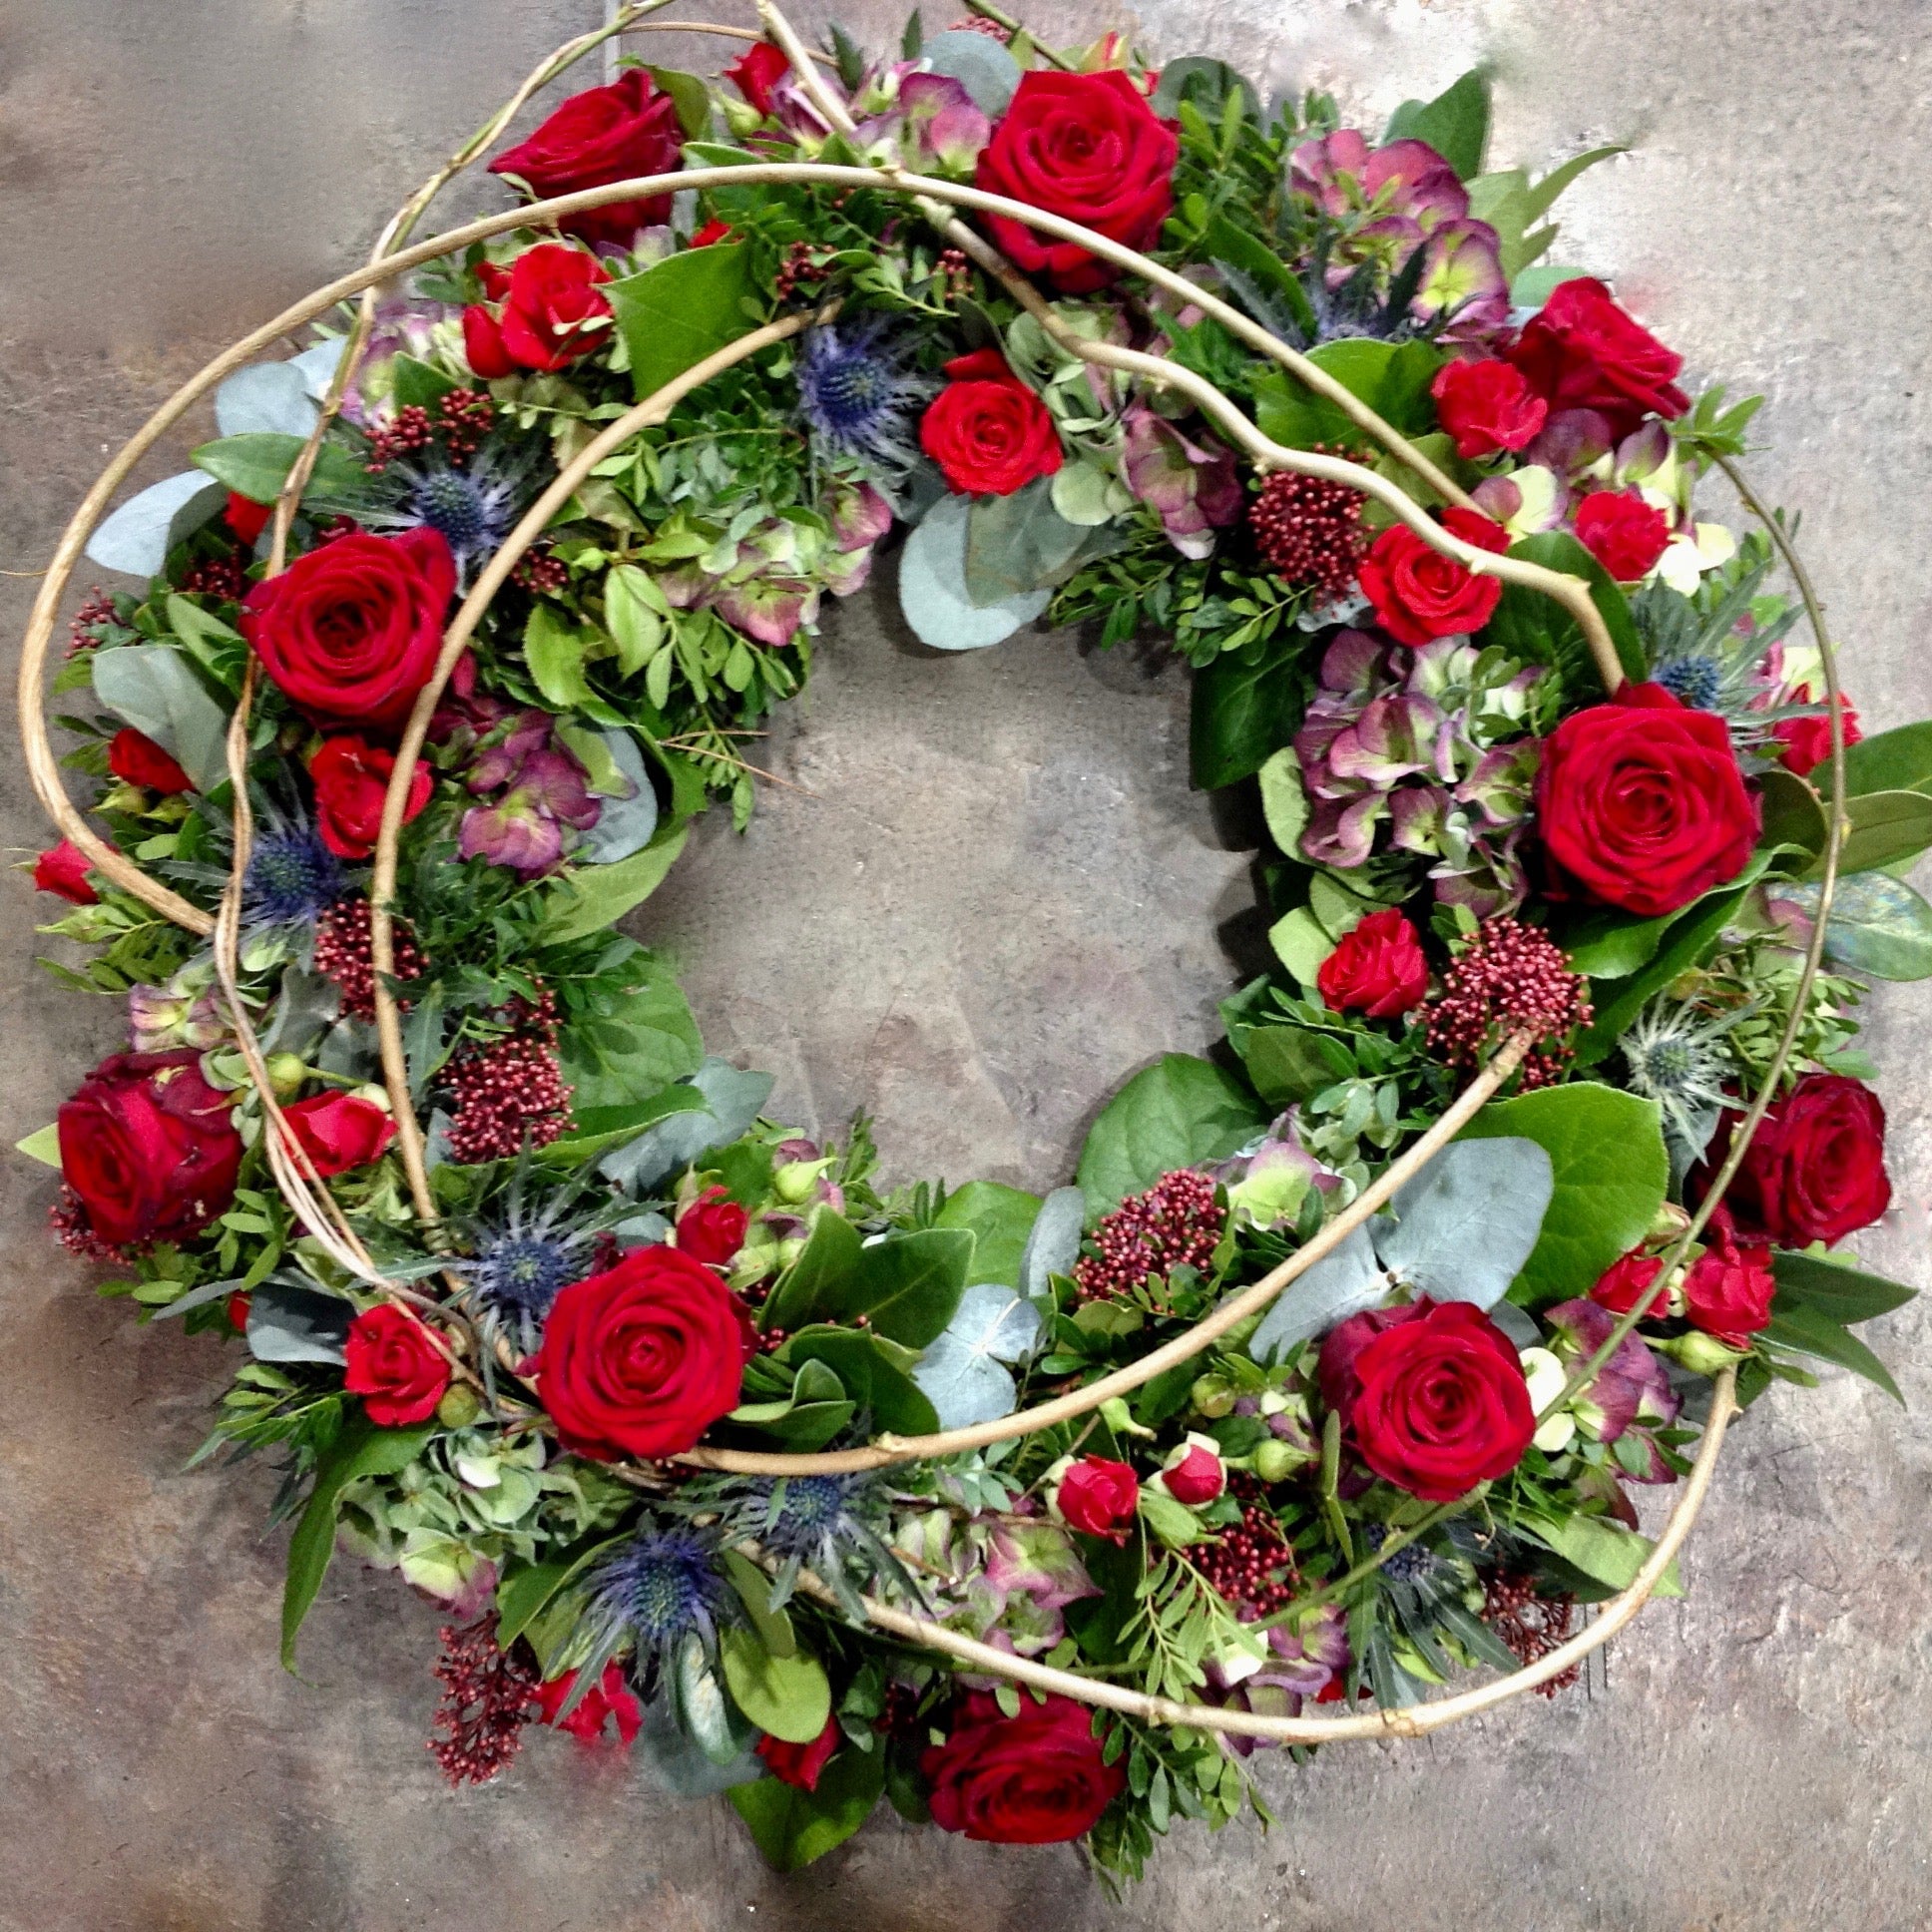 Red roses and blue flowers with vines funeral wreath